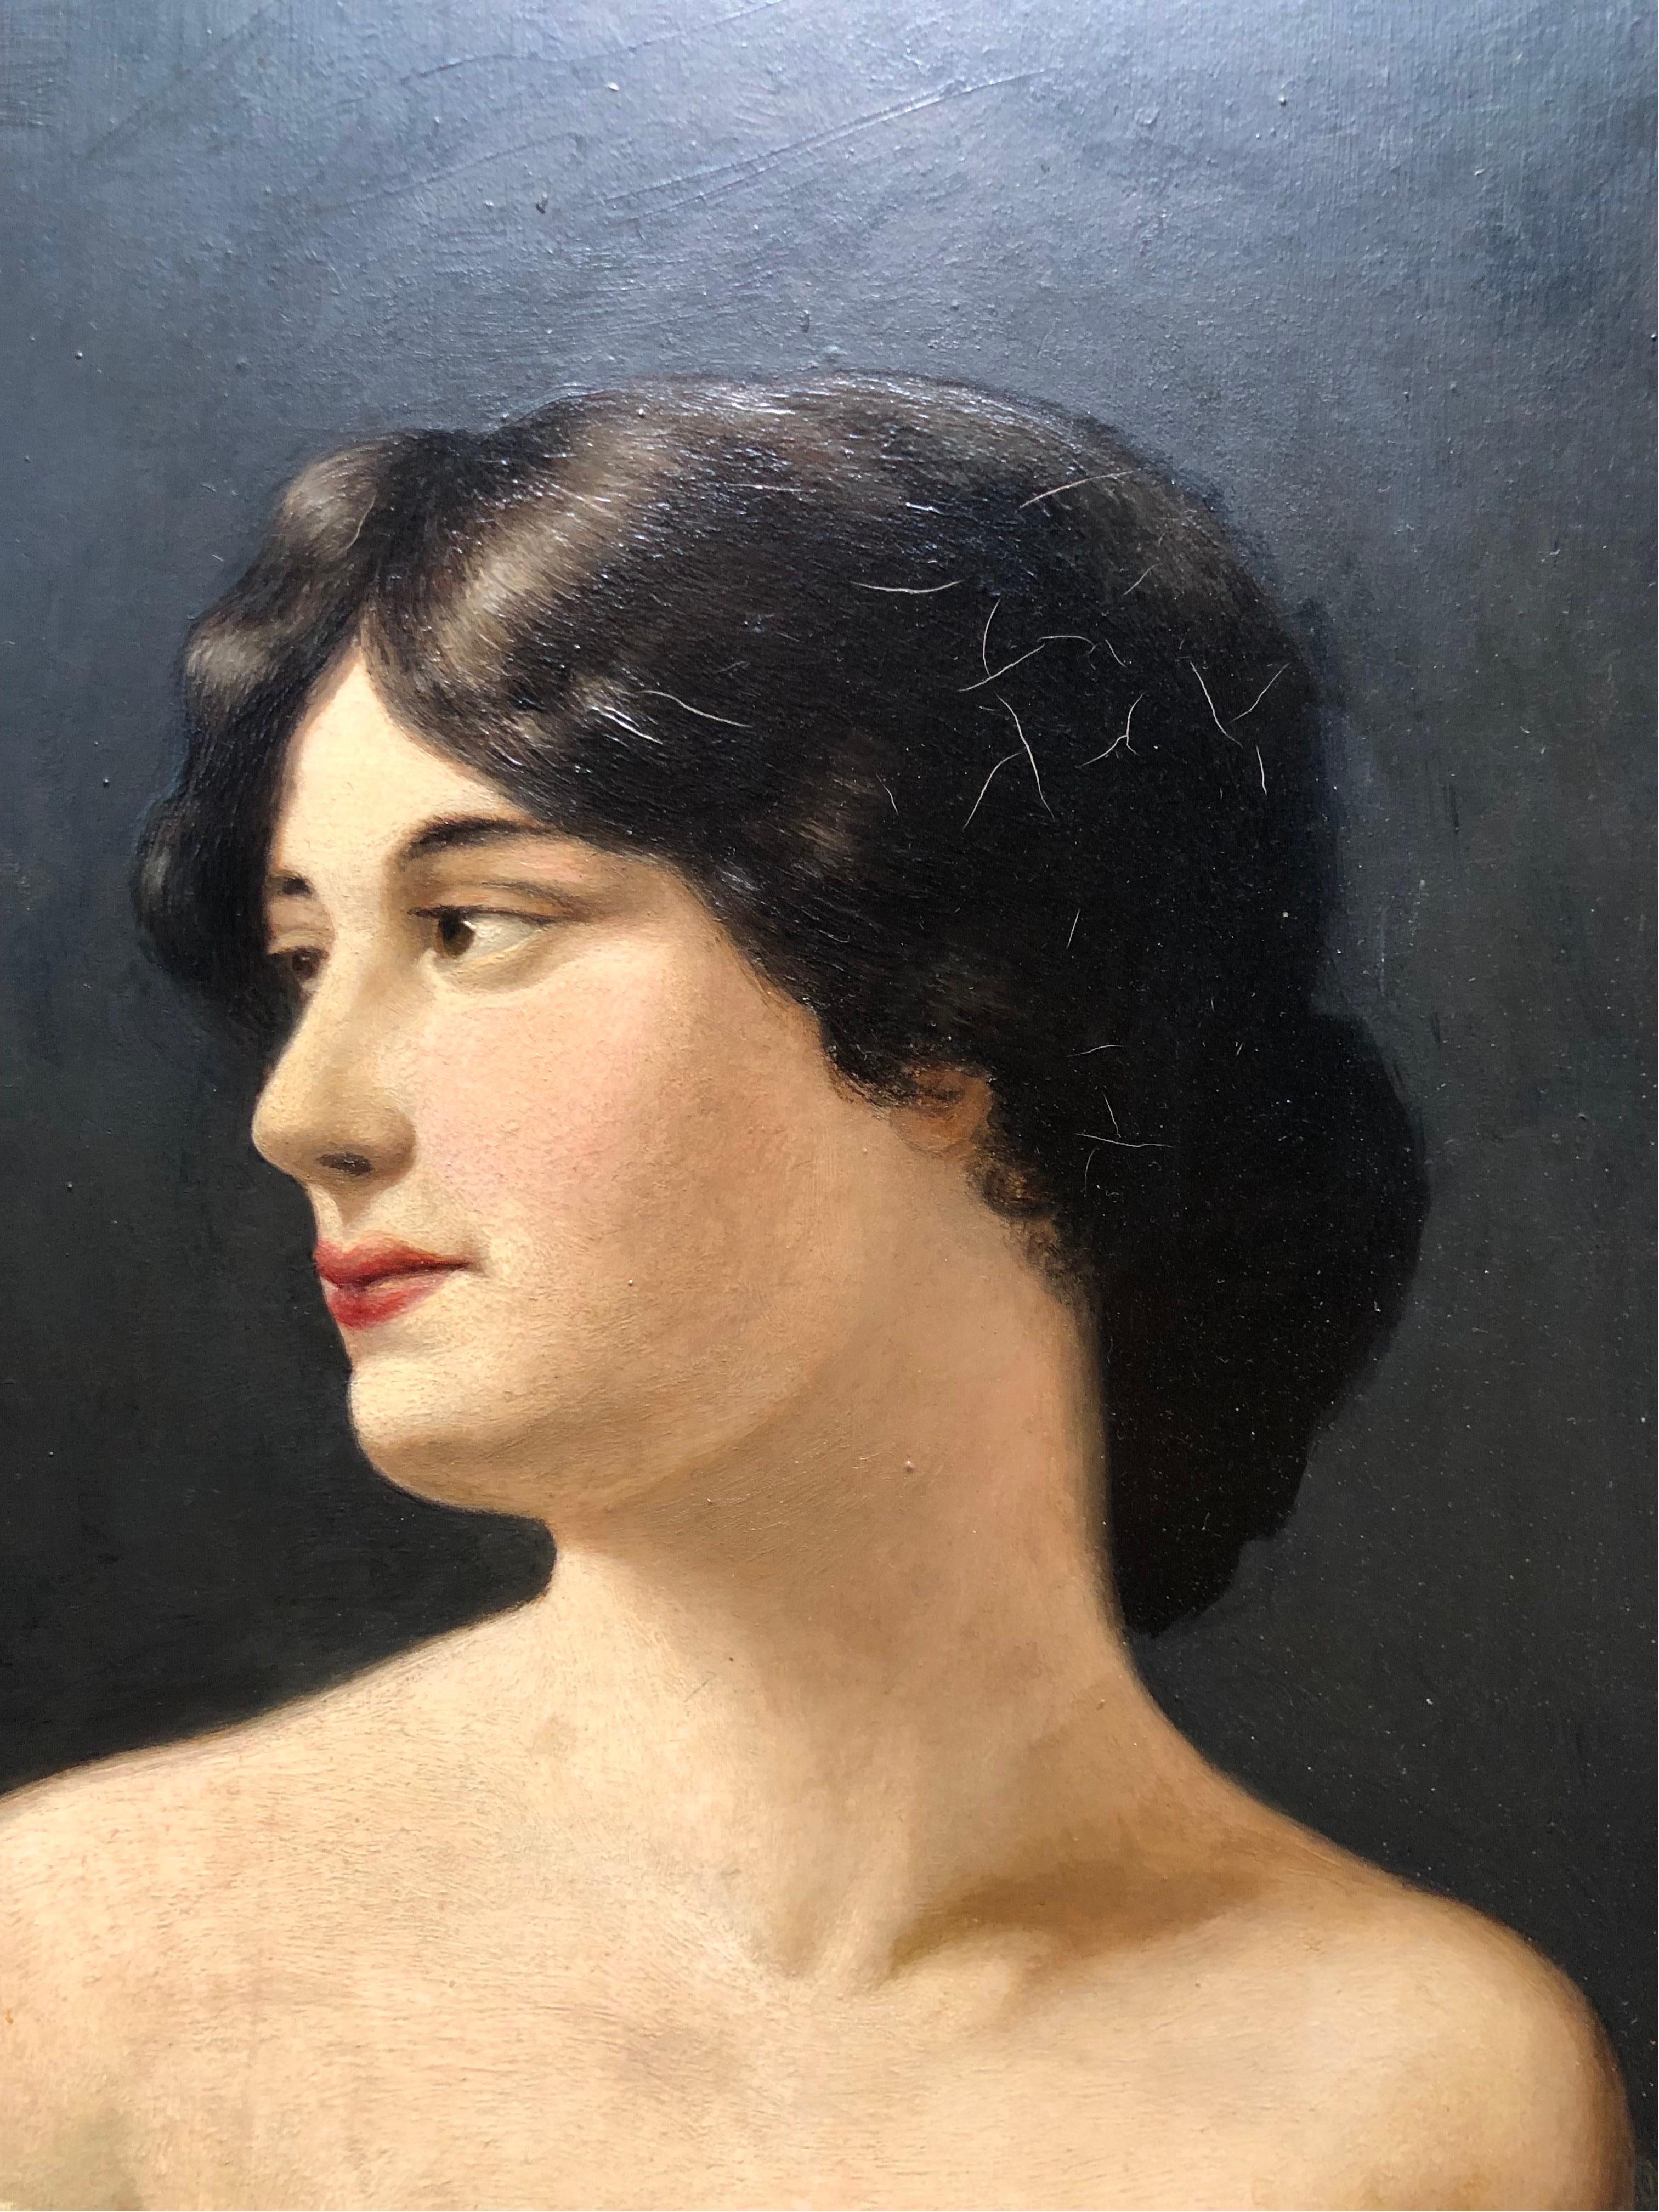 A strikingly beautiful antique oil on board portrait  of a woman. 
Signed on the rear by an unknown artist. 
In great antique condition with no visible signs of repair. 
It has not been out of the frame. 
Measurements are with the frame. 
Some